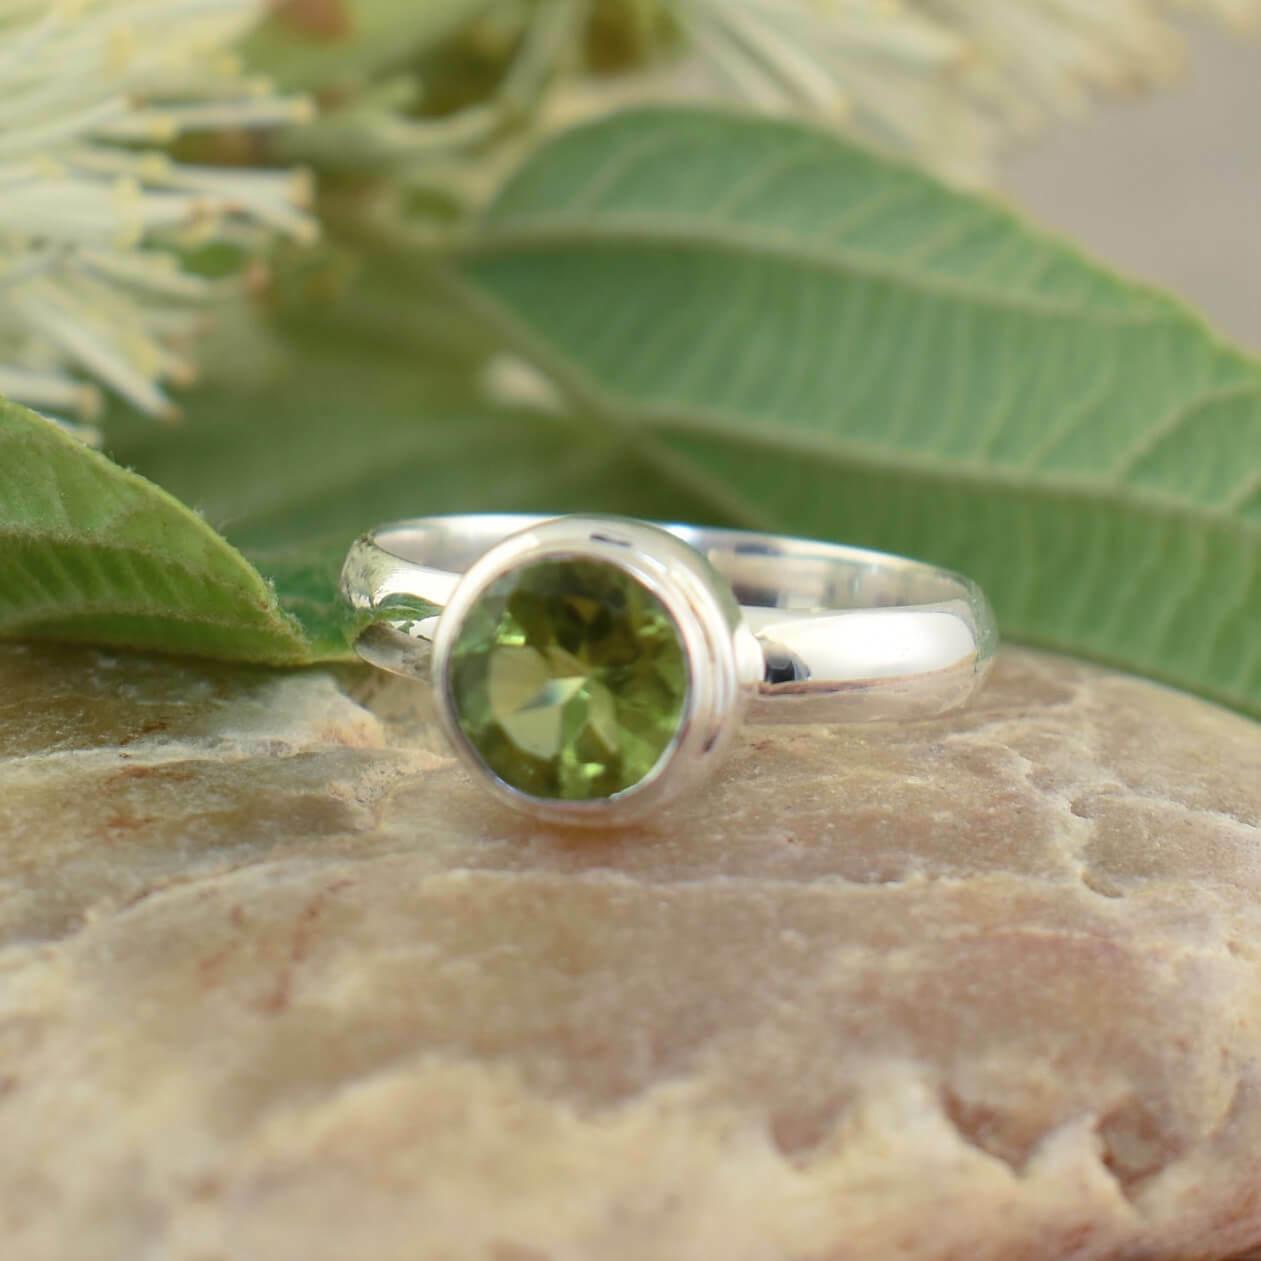 Round peridot ring handcrafted in sterling silver